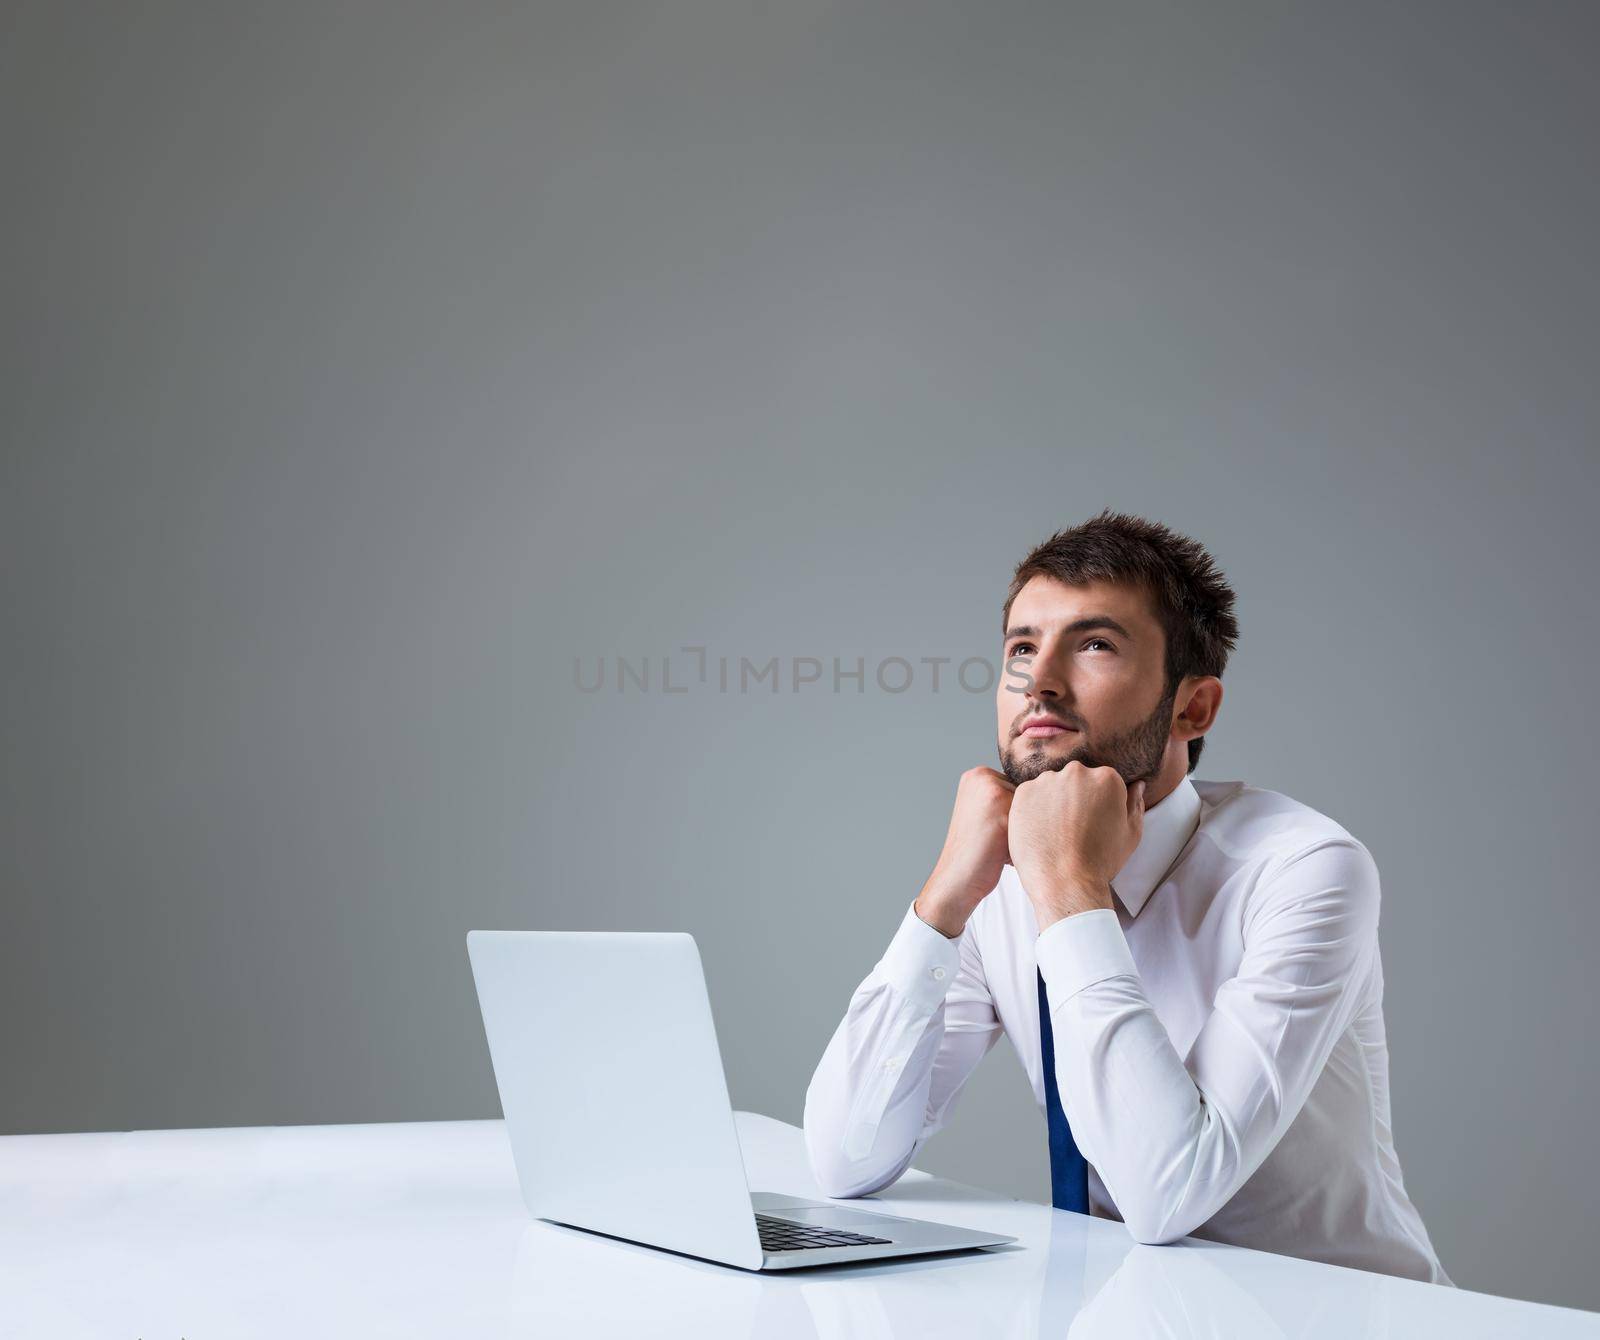 young man thinking uses a laptop computer while sitting at a table. Office clothing. copyspace